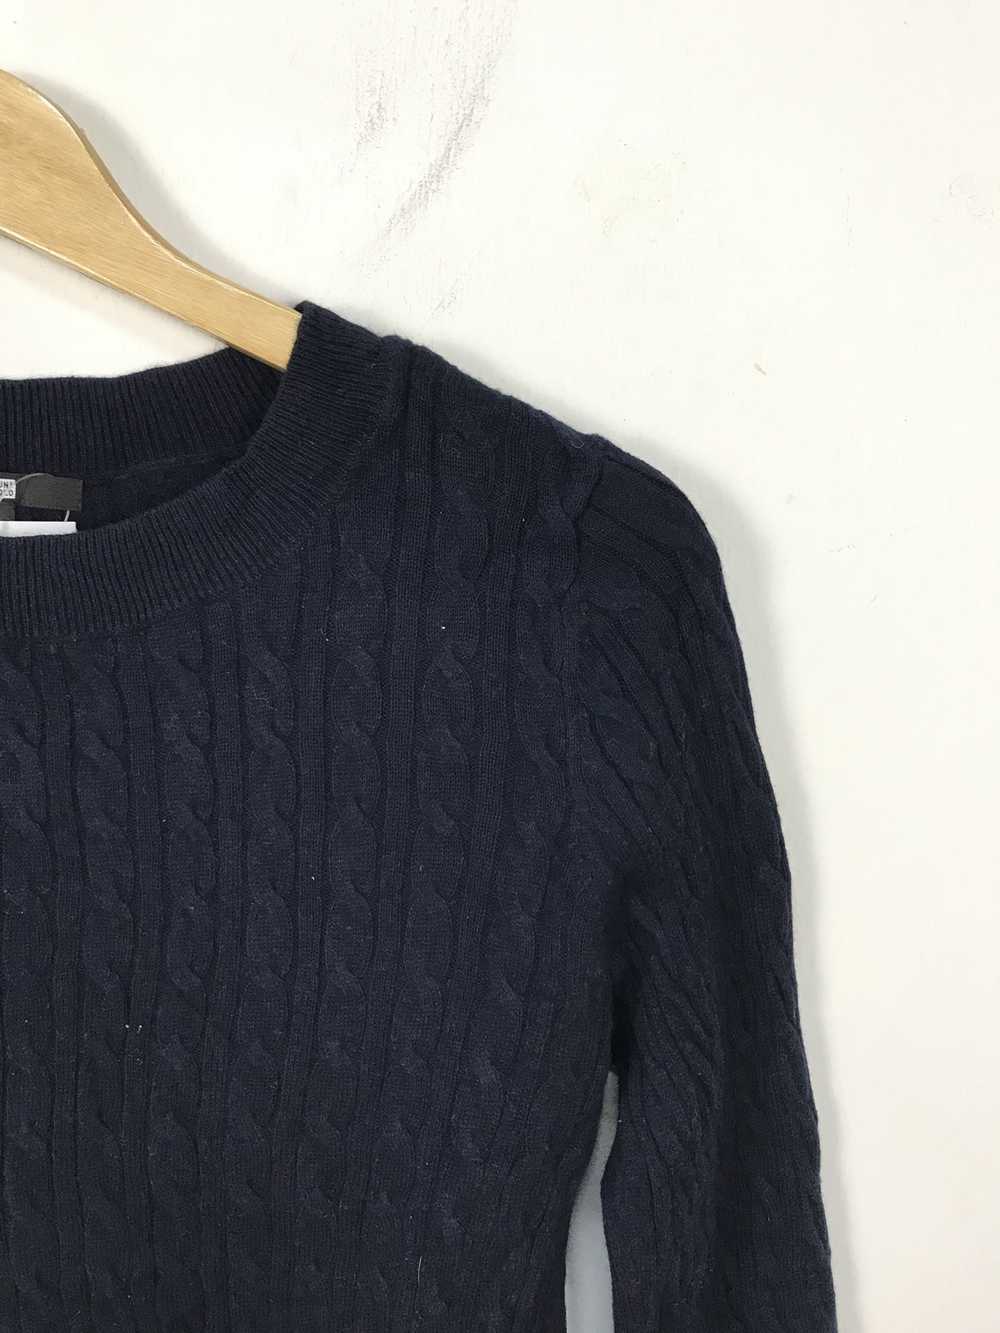 Coloured Cable Knit Sweater × Japanese Brand × Un… - image 3